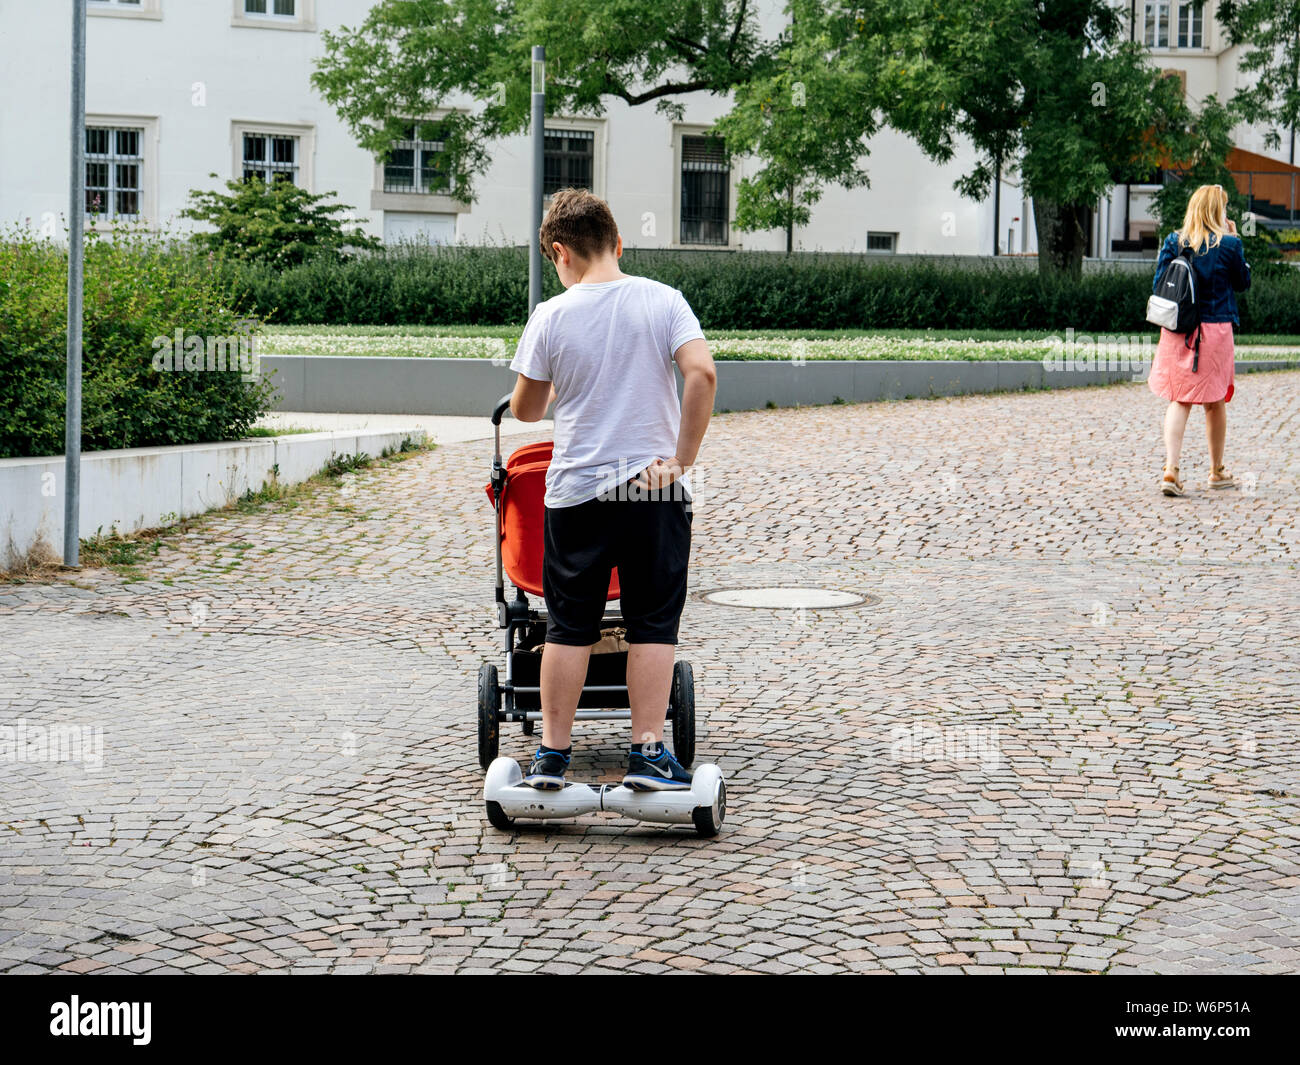 Baden-Baden, Germany - Jul 7, Rear view of lazy man pushing cart stroller baby while riding a electric hoverboard on the cobblestone of Baden-Baden Stock Photo - Alamy